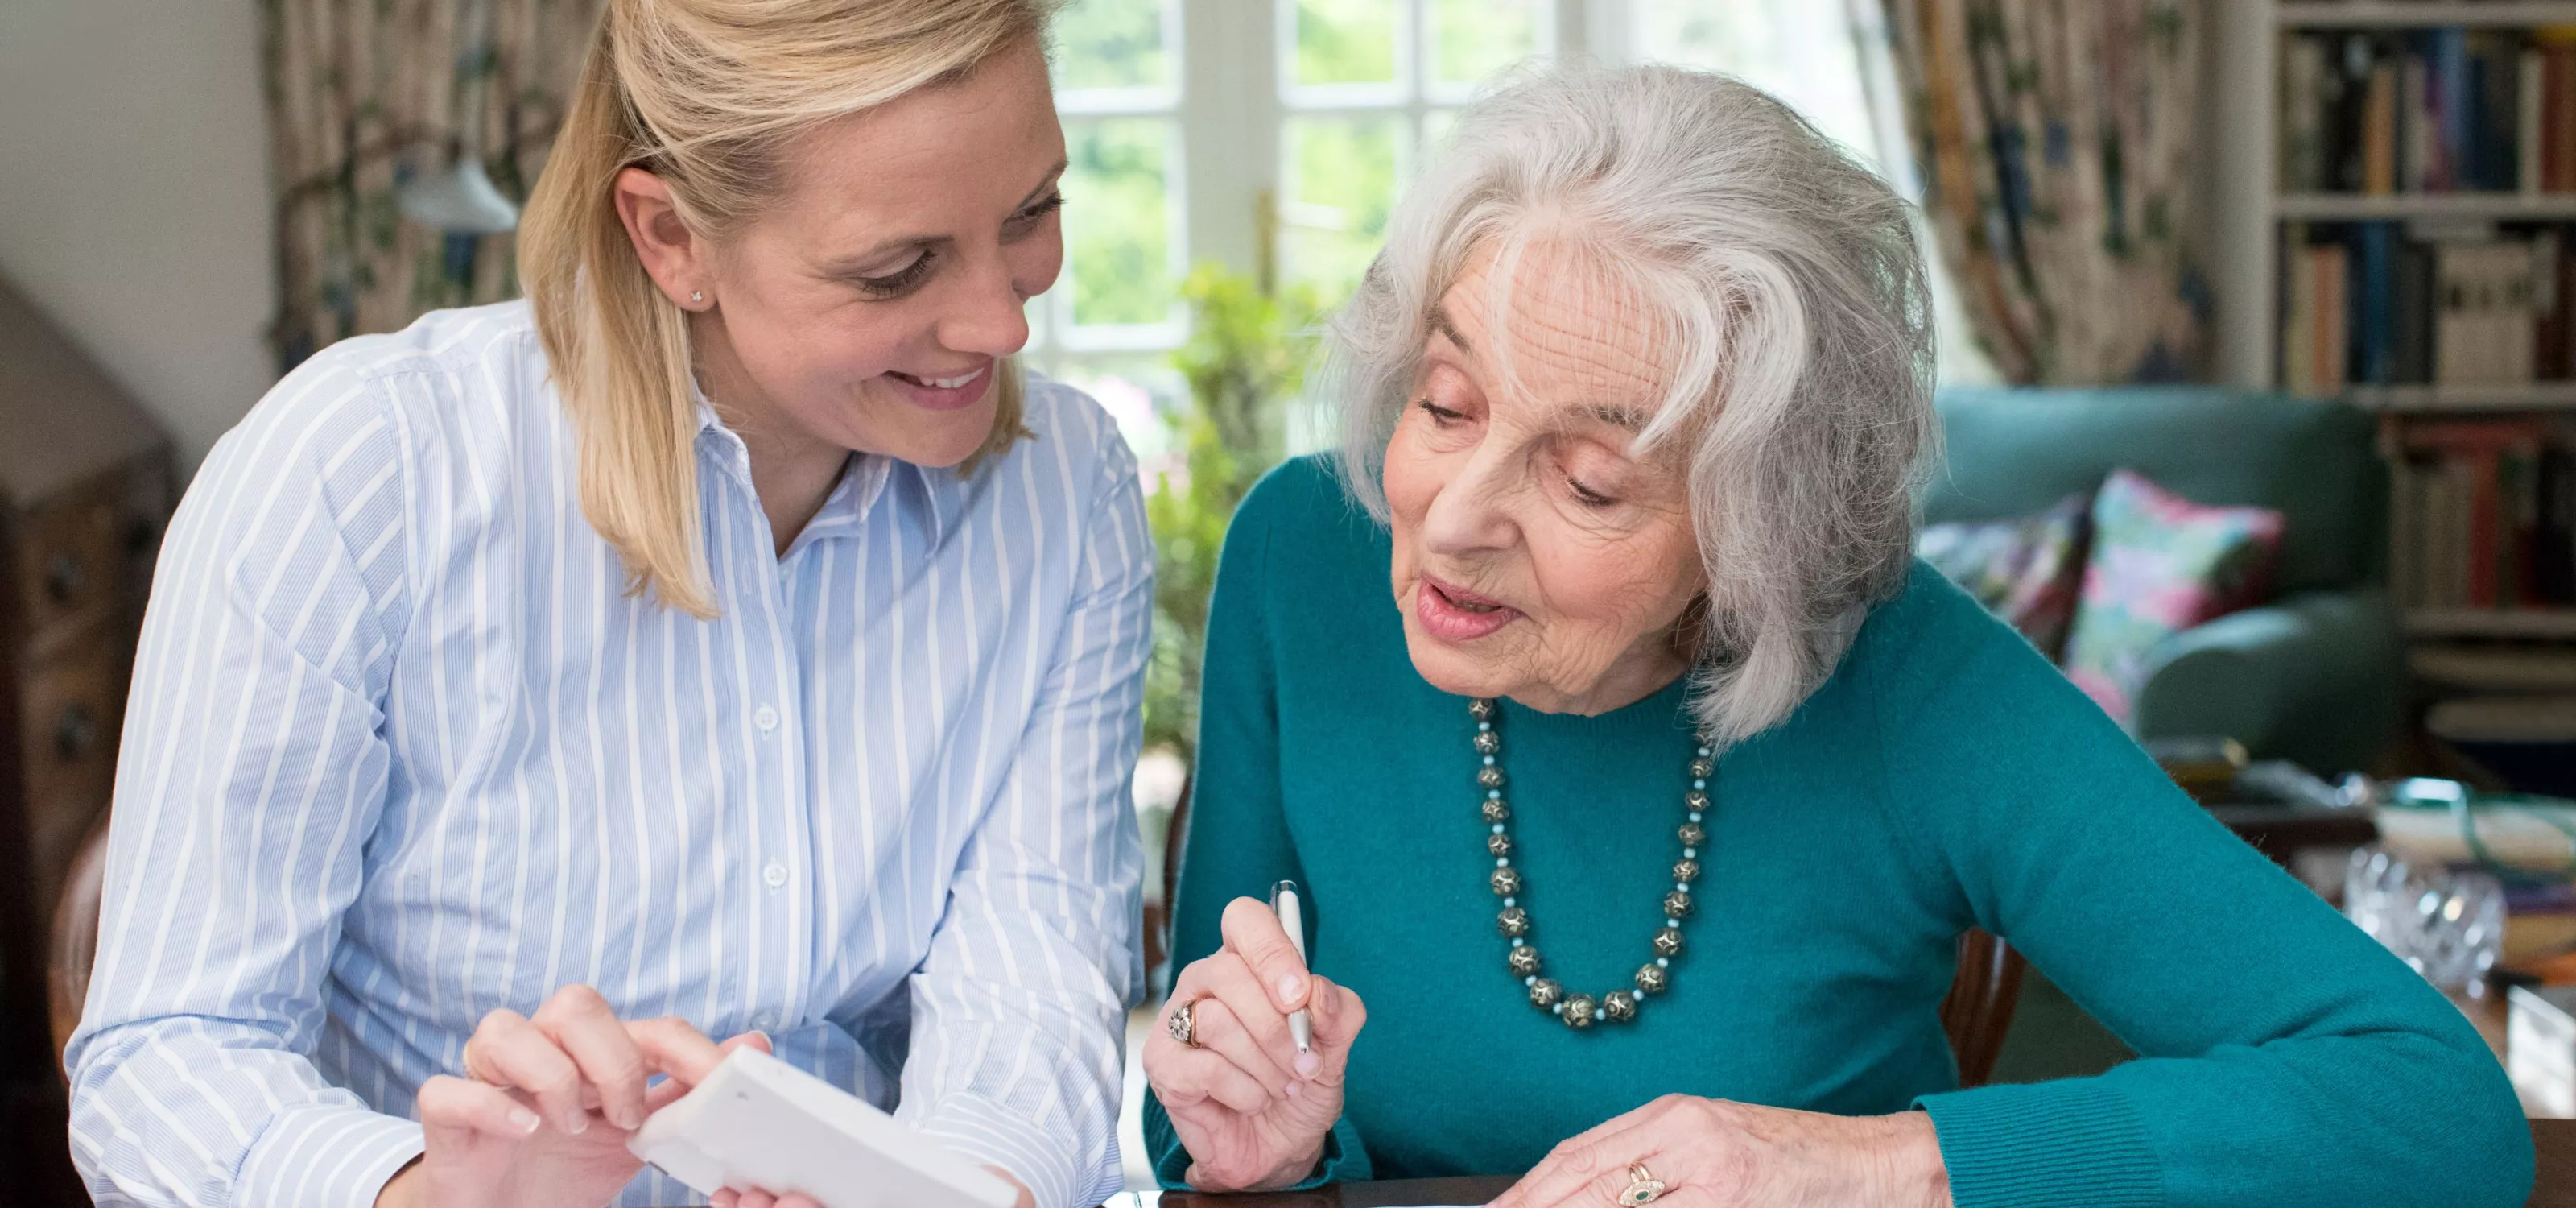 One woman helping another elderly woman with financial planning.